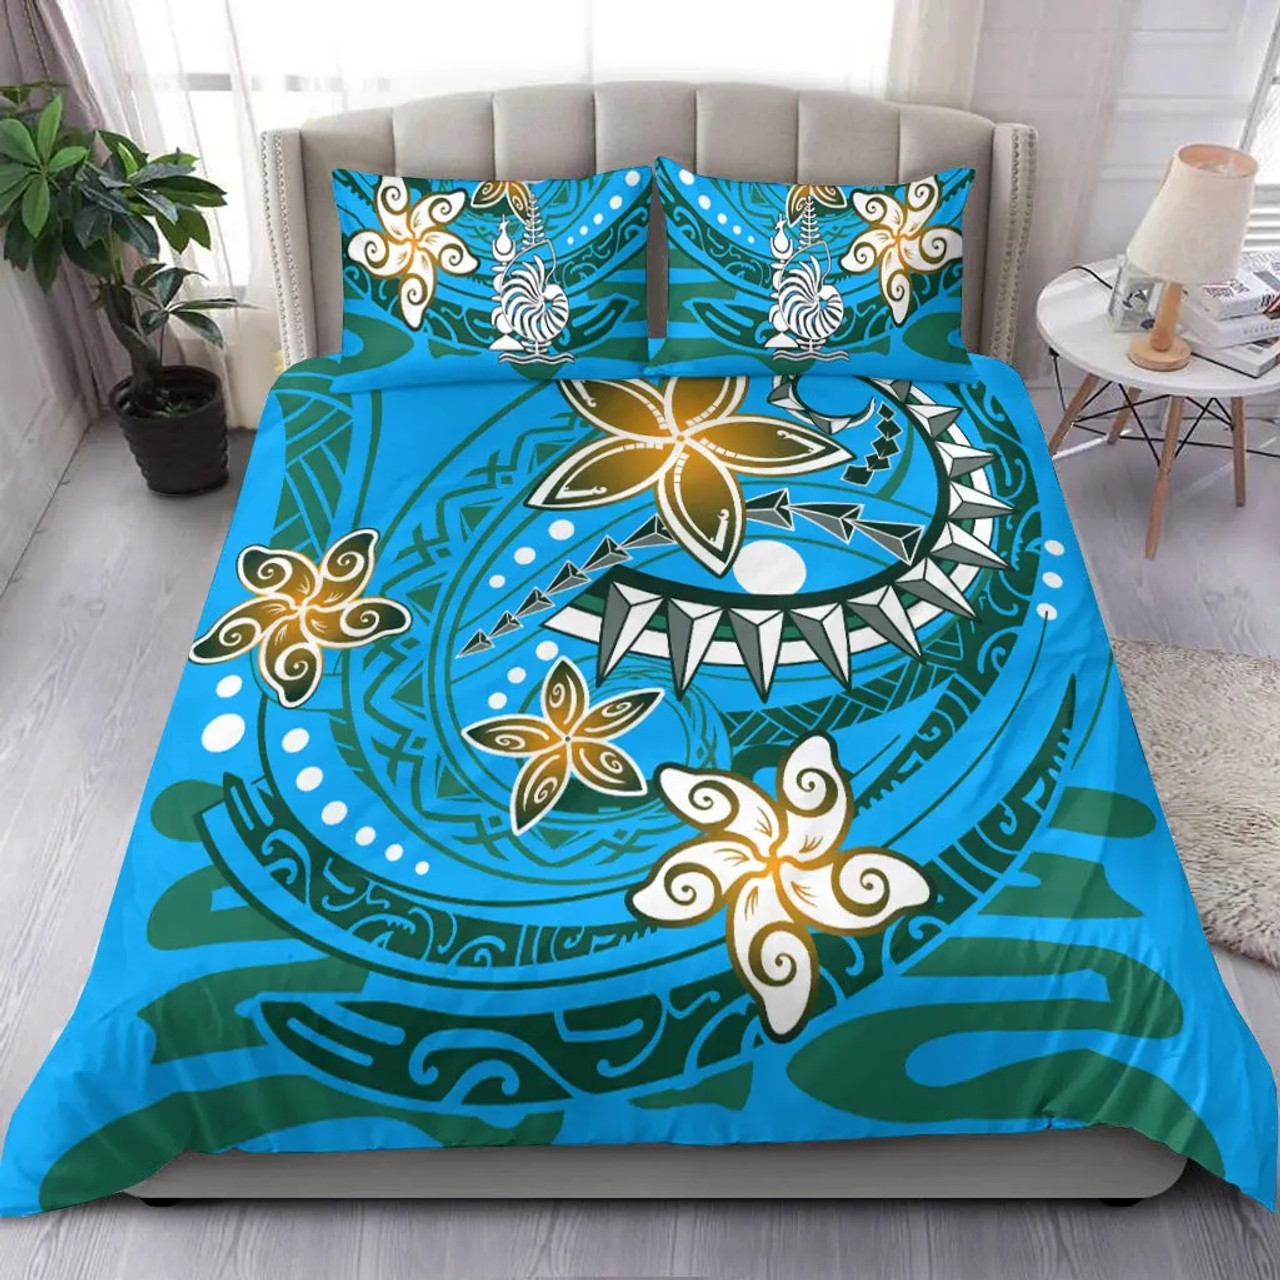 New Caledonia Bedding Set - Spring Style Blue Color 1